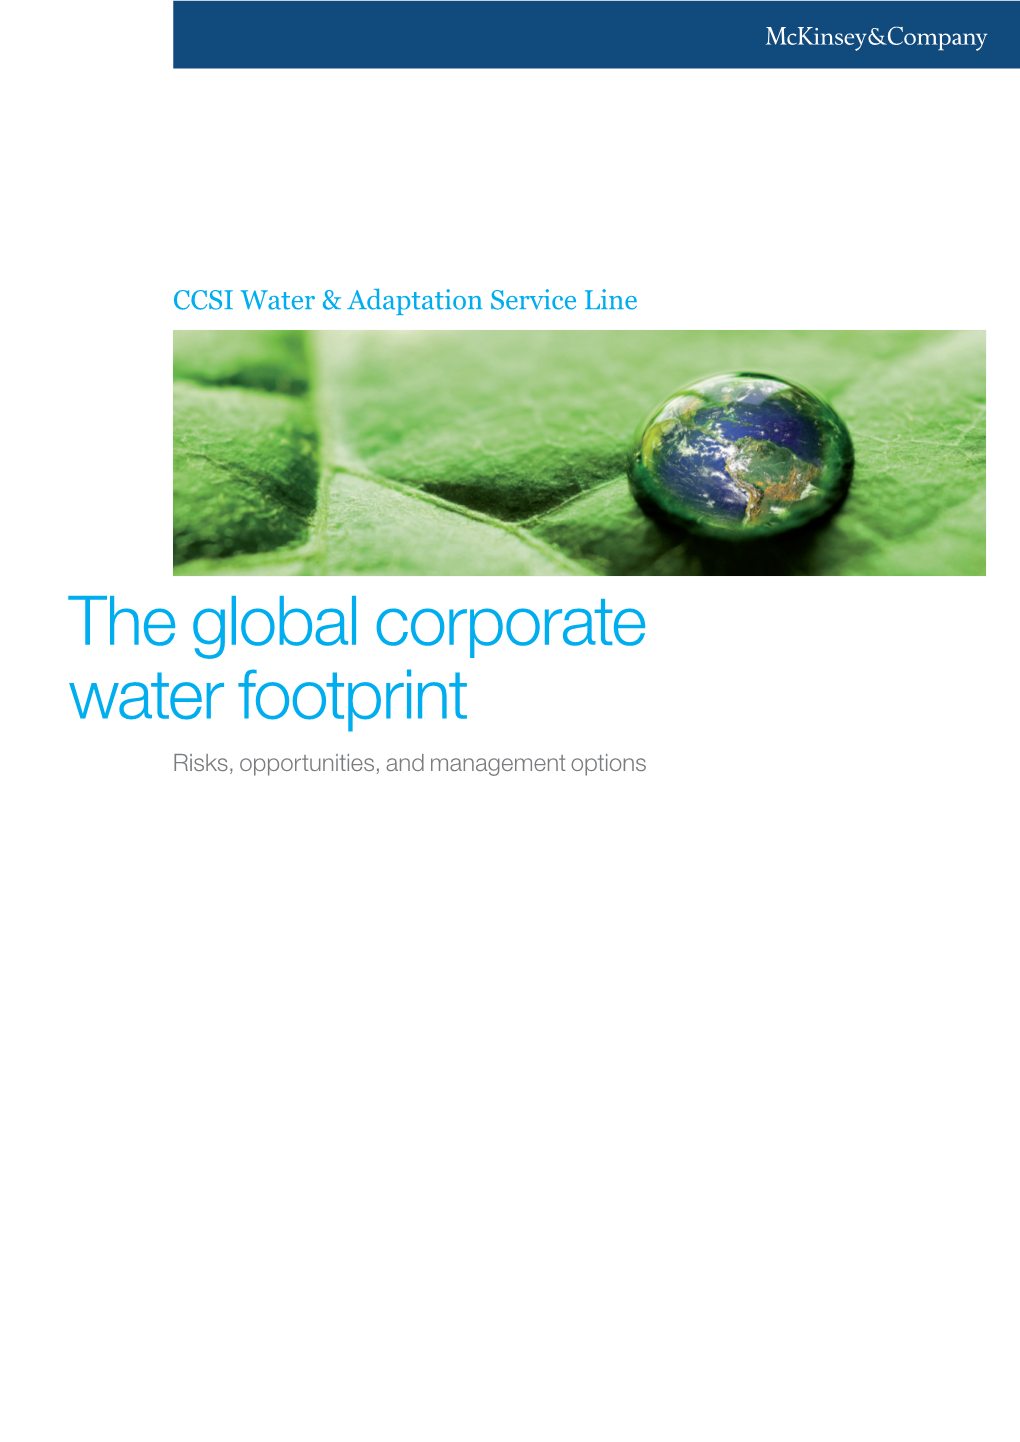 The Global Corporate Water Footprint Risks, Opportunities, and Management Options